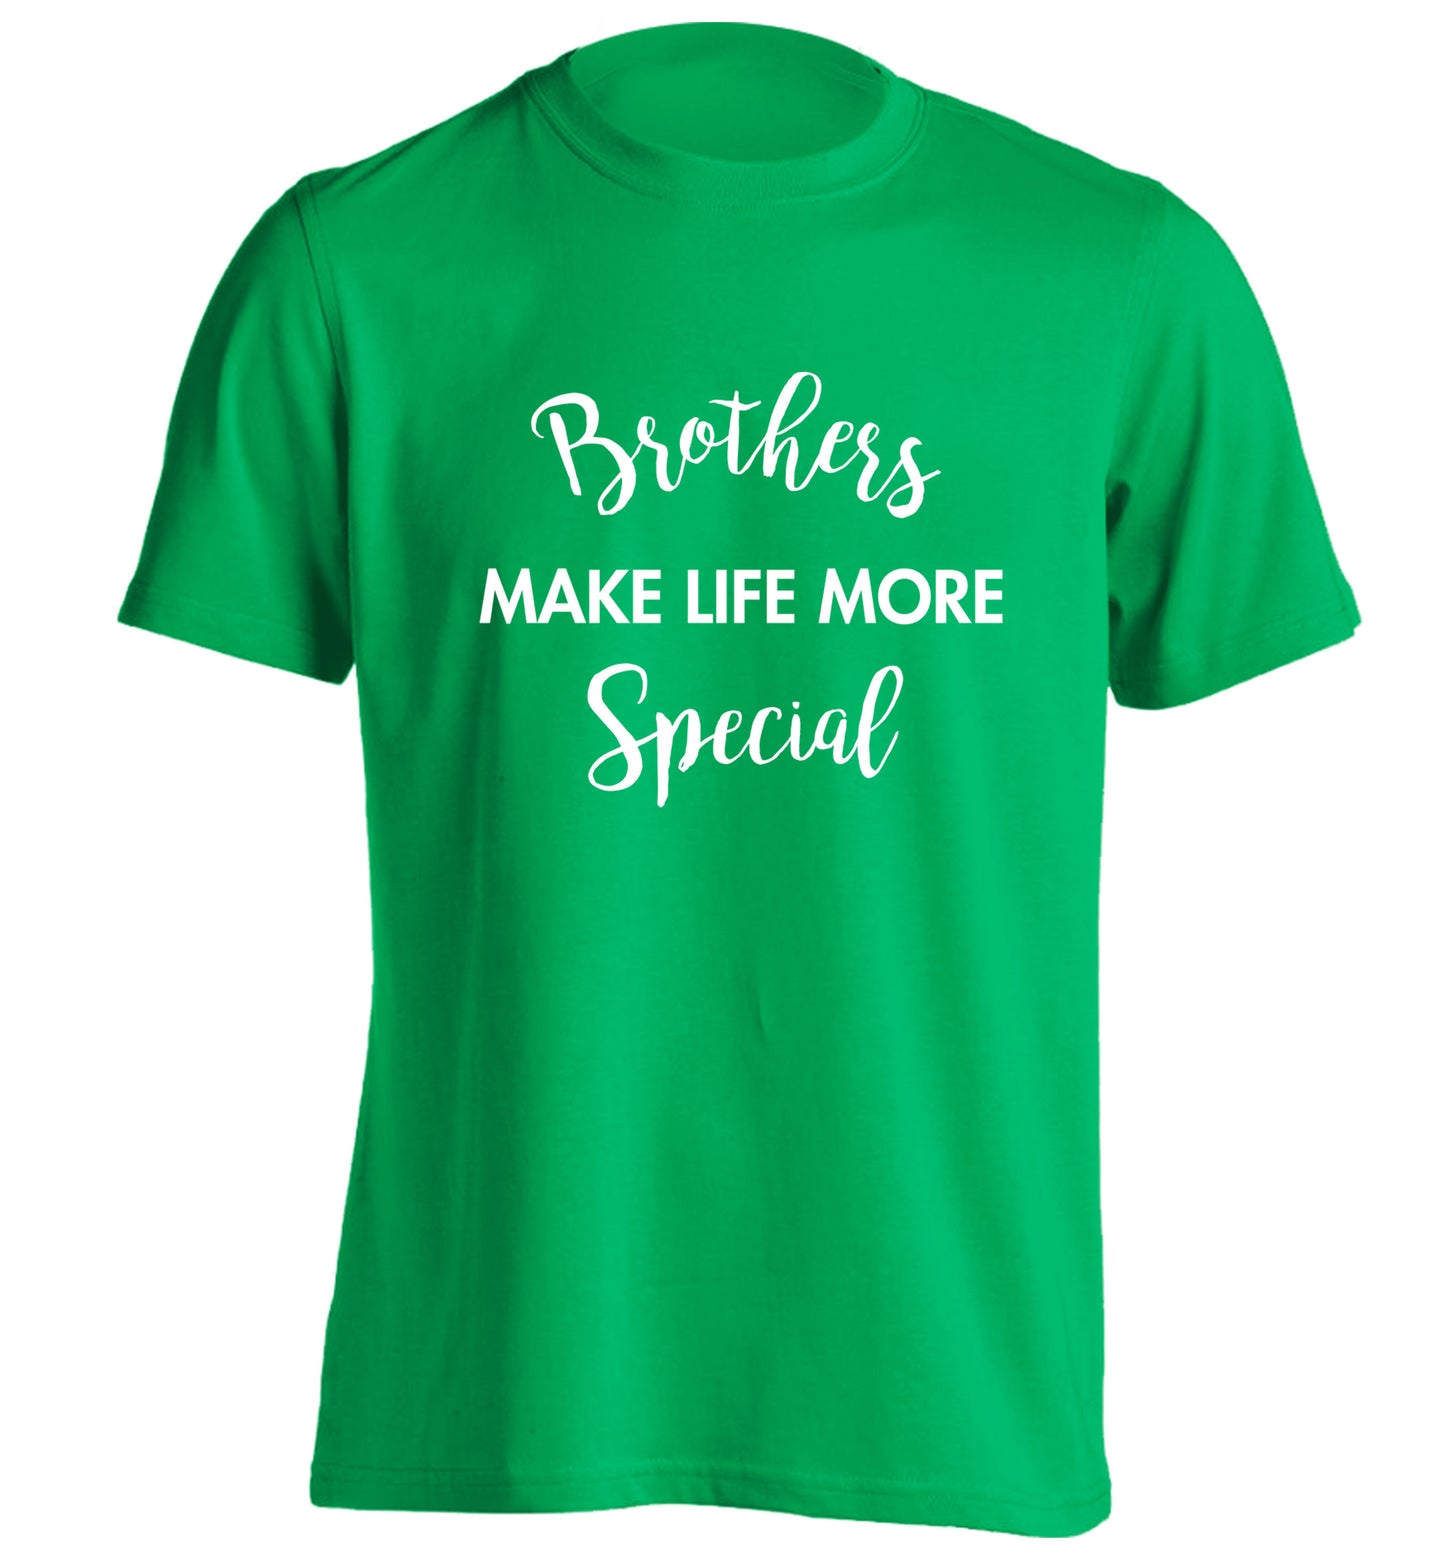 Brothers make life more special adults unisex green Tshirt 2XL